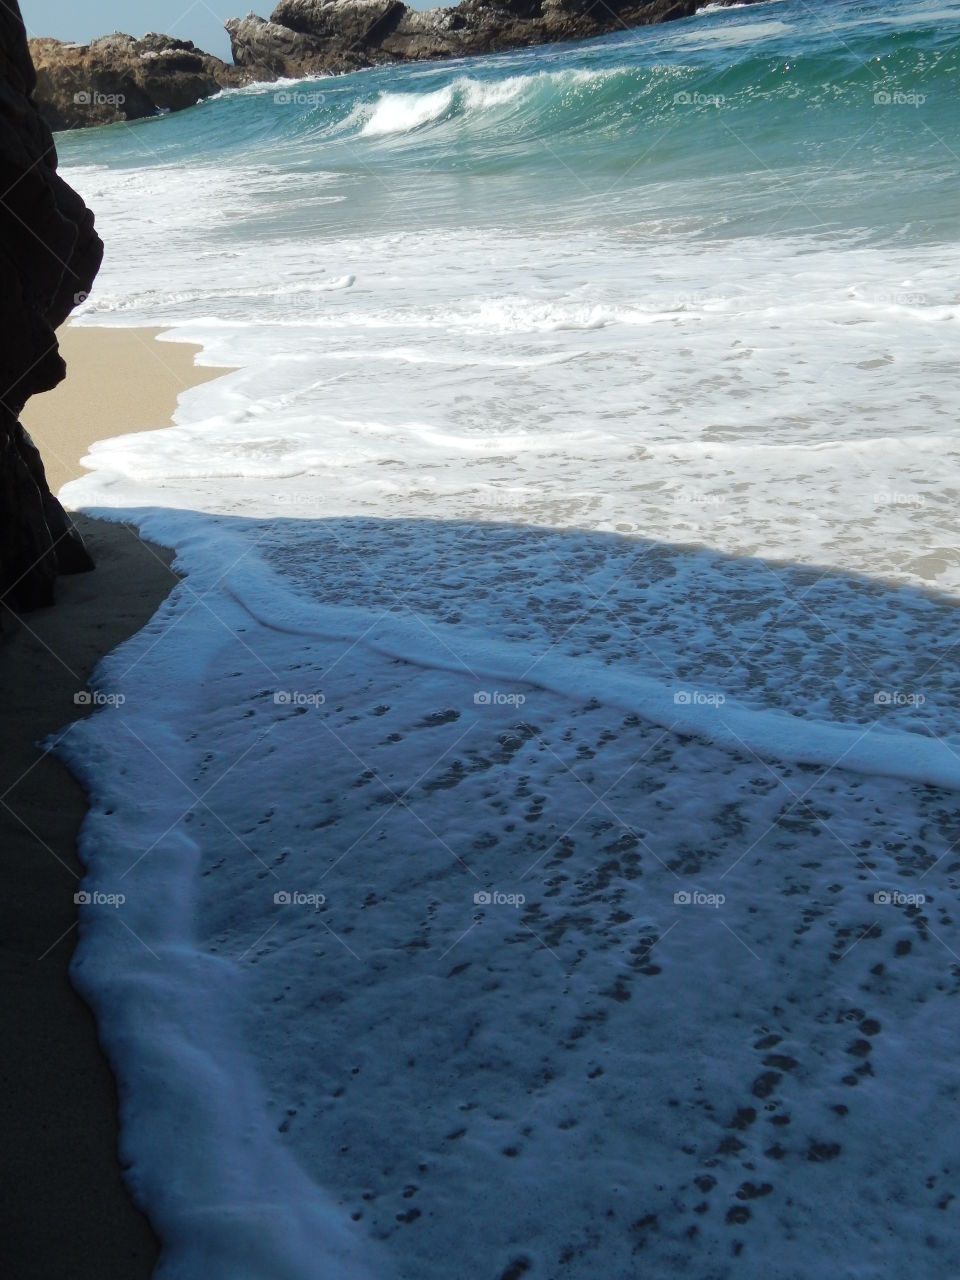 Big Sur beach with expansive sand and seafoam